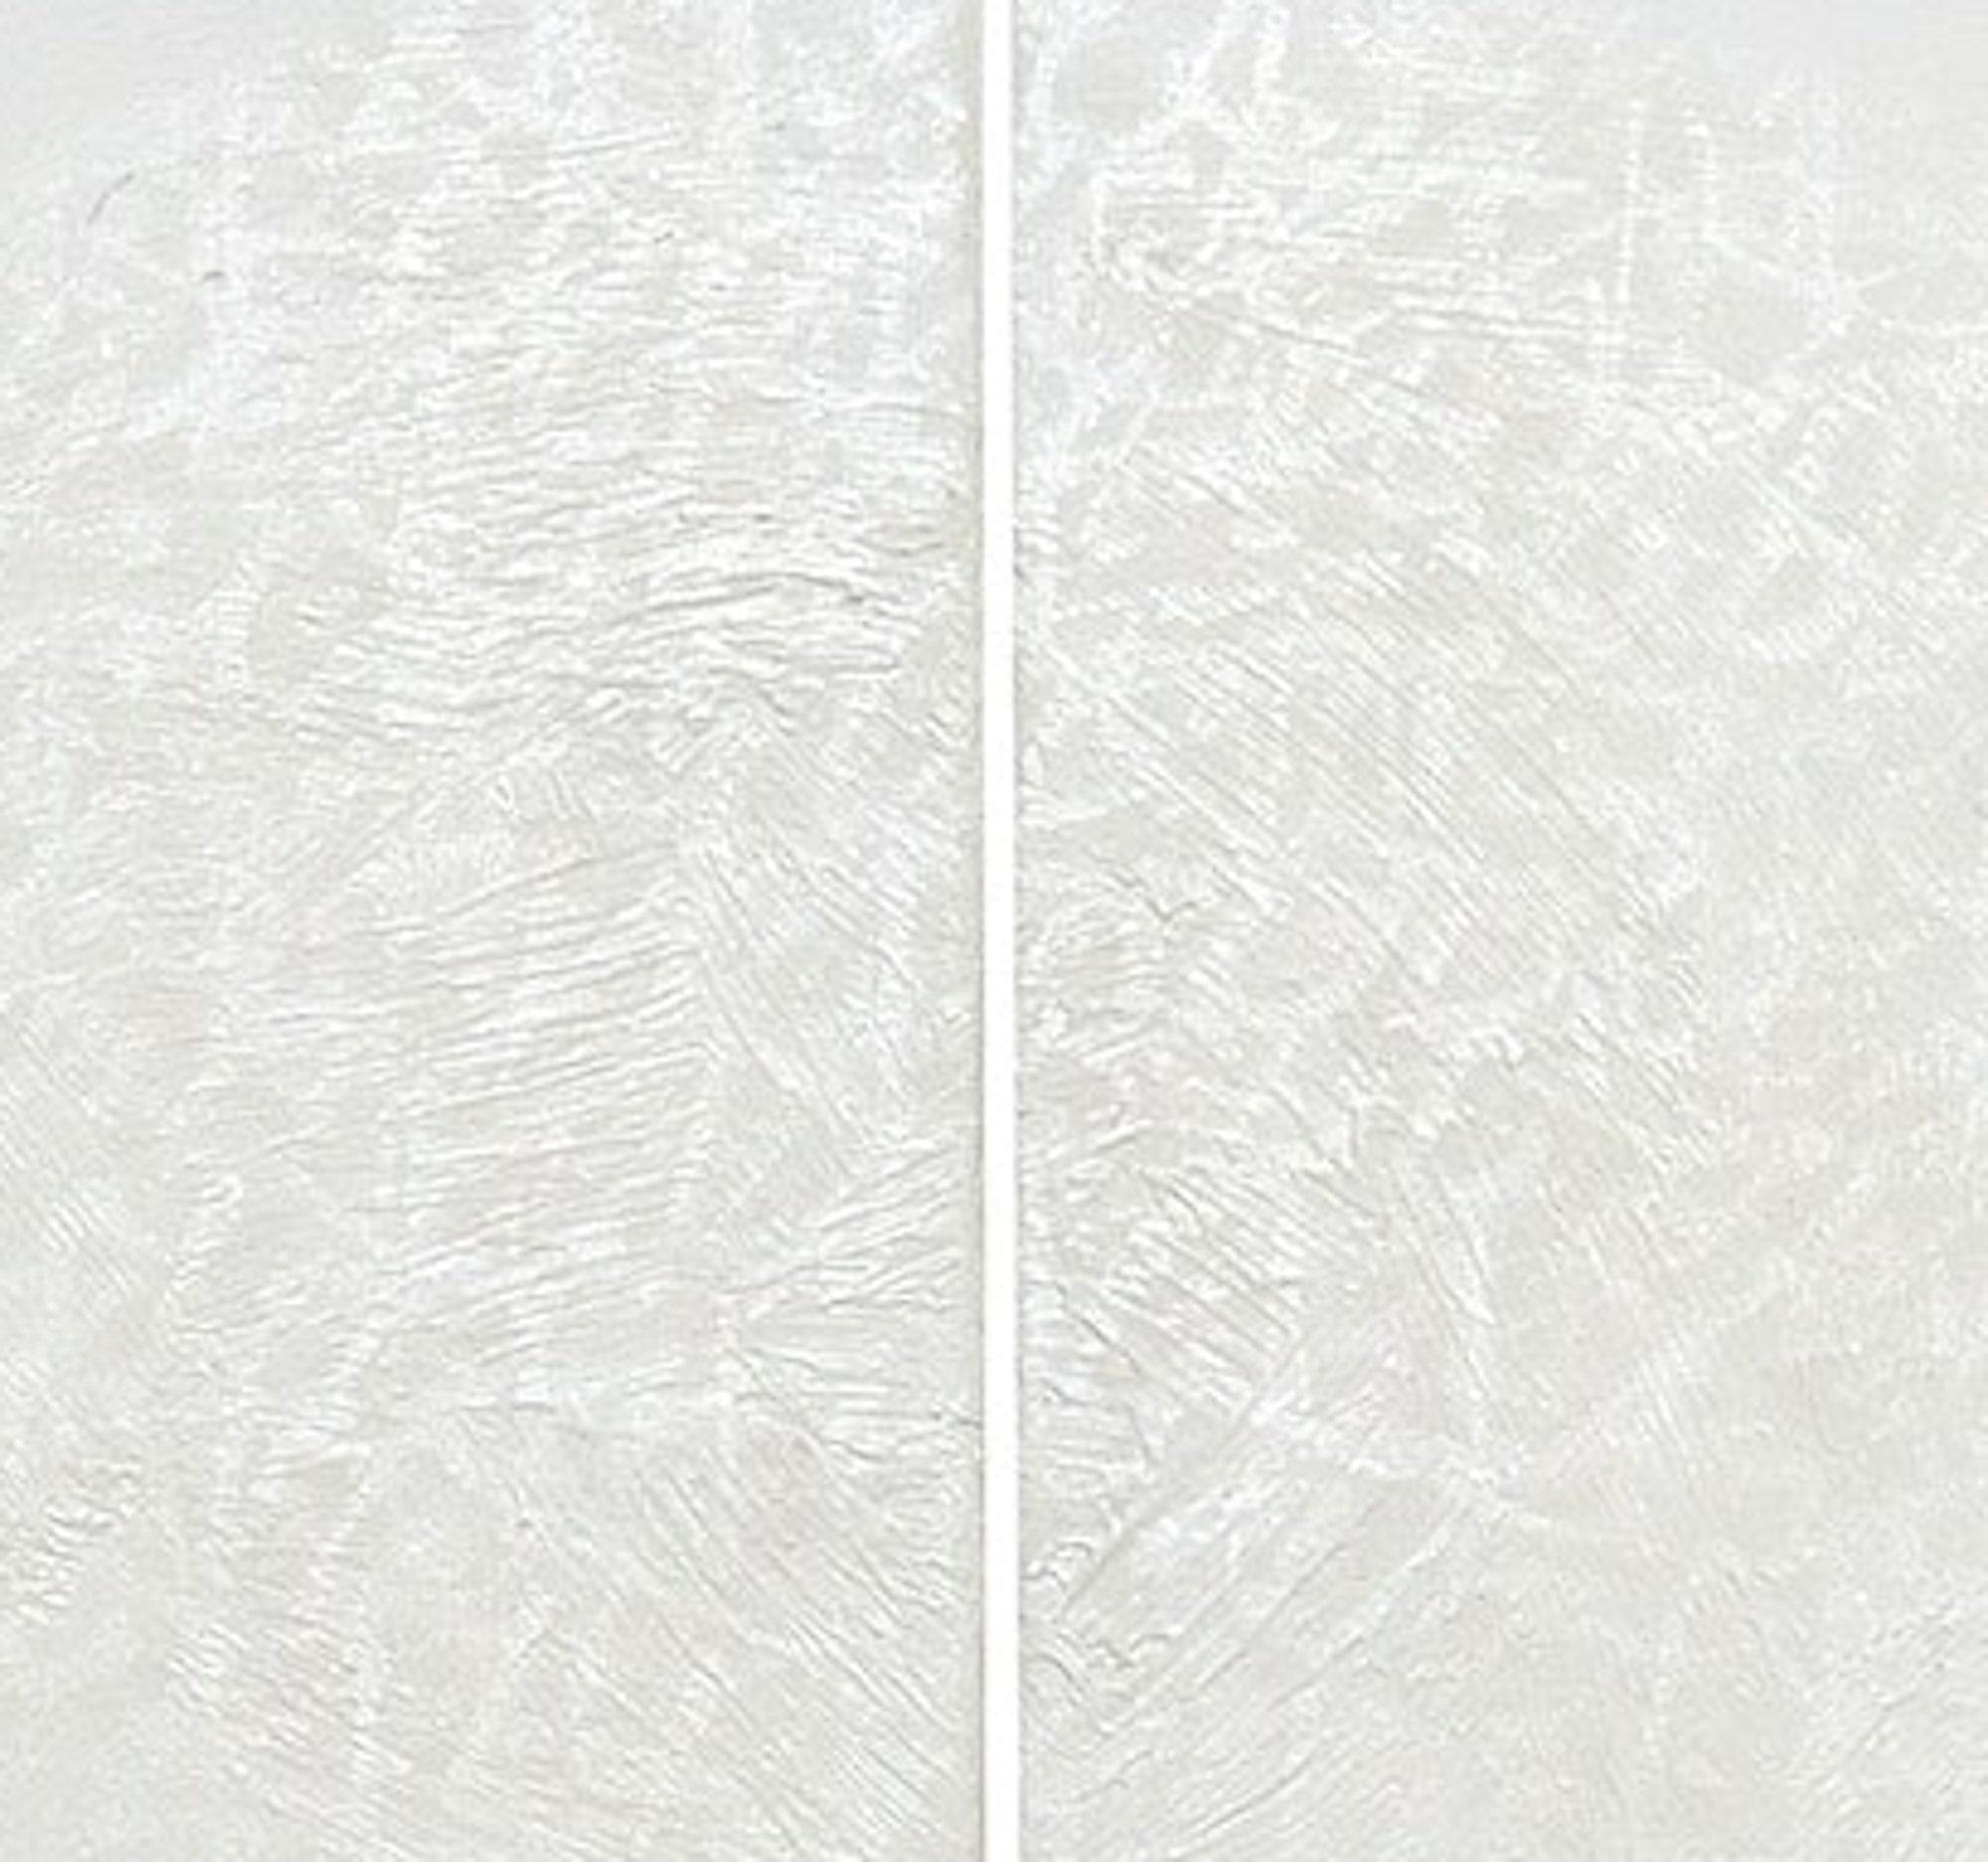 TN600-D by Hachiro Kanno - Calligraphy-based abstract painting, diptych, blue For Sale 4